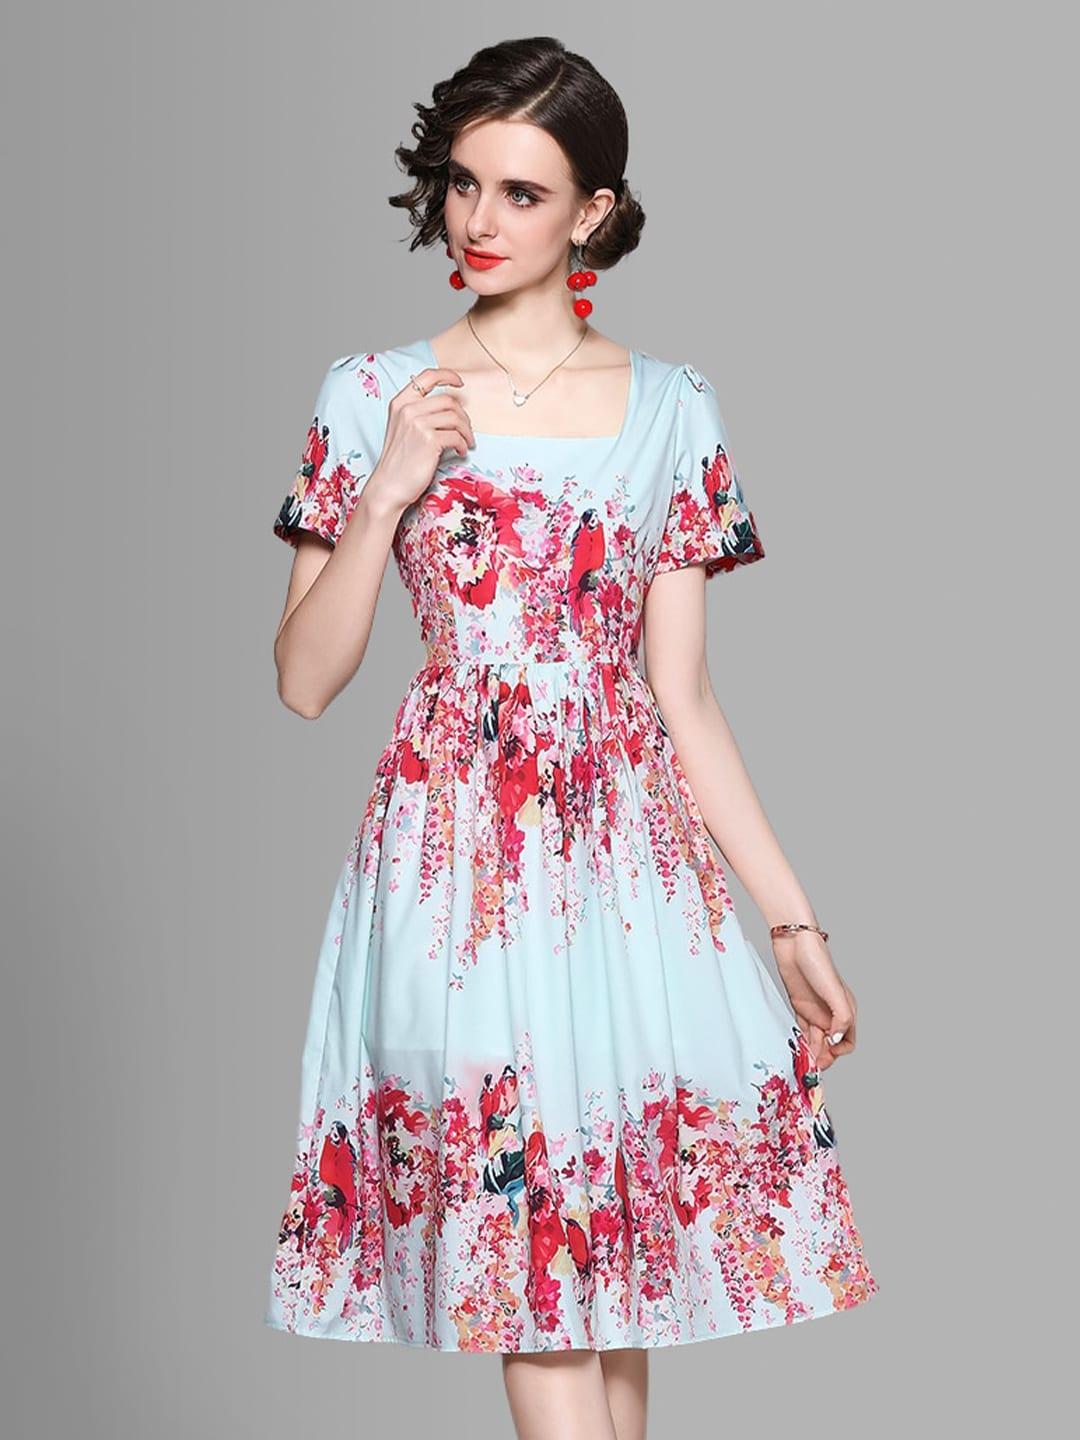 jc-collection-blue-&-red-floral-dress